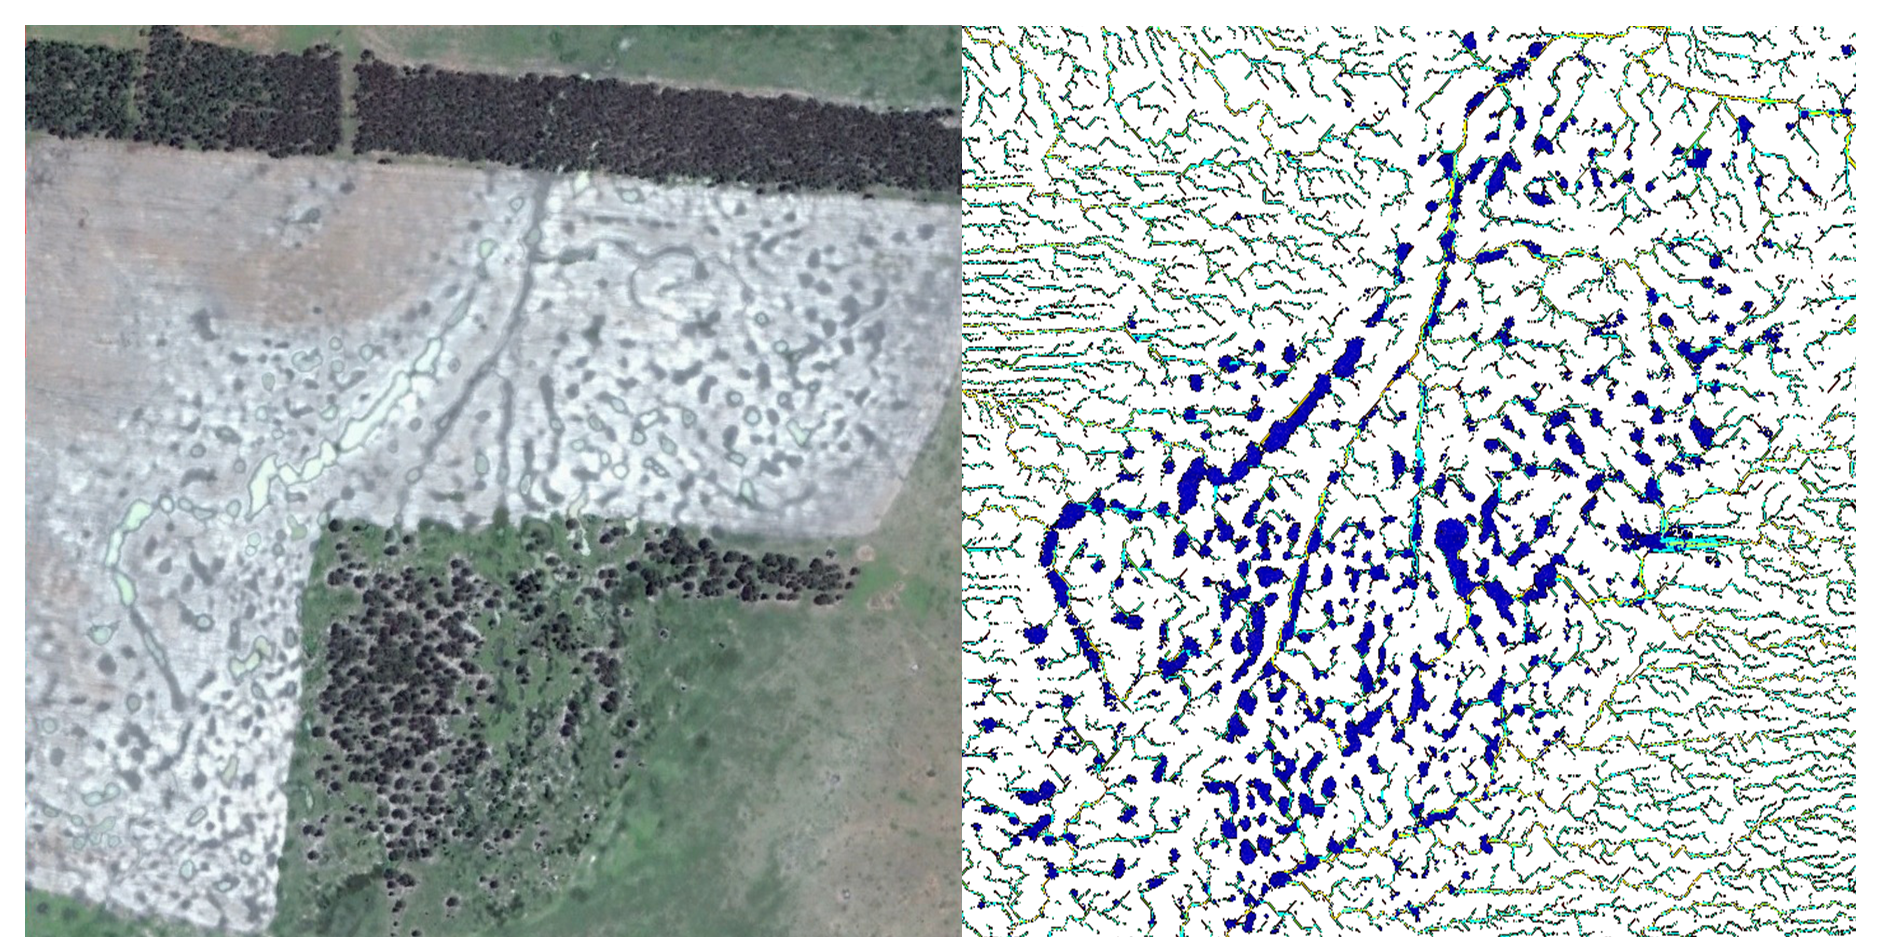 Screen shot showing Google Earth™ image of a field near Condamine, Queensland gilgai showing superimposed lines representing after rainfall and the corresponding surface water flow model for the same area.